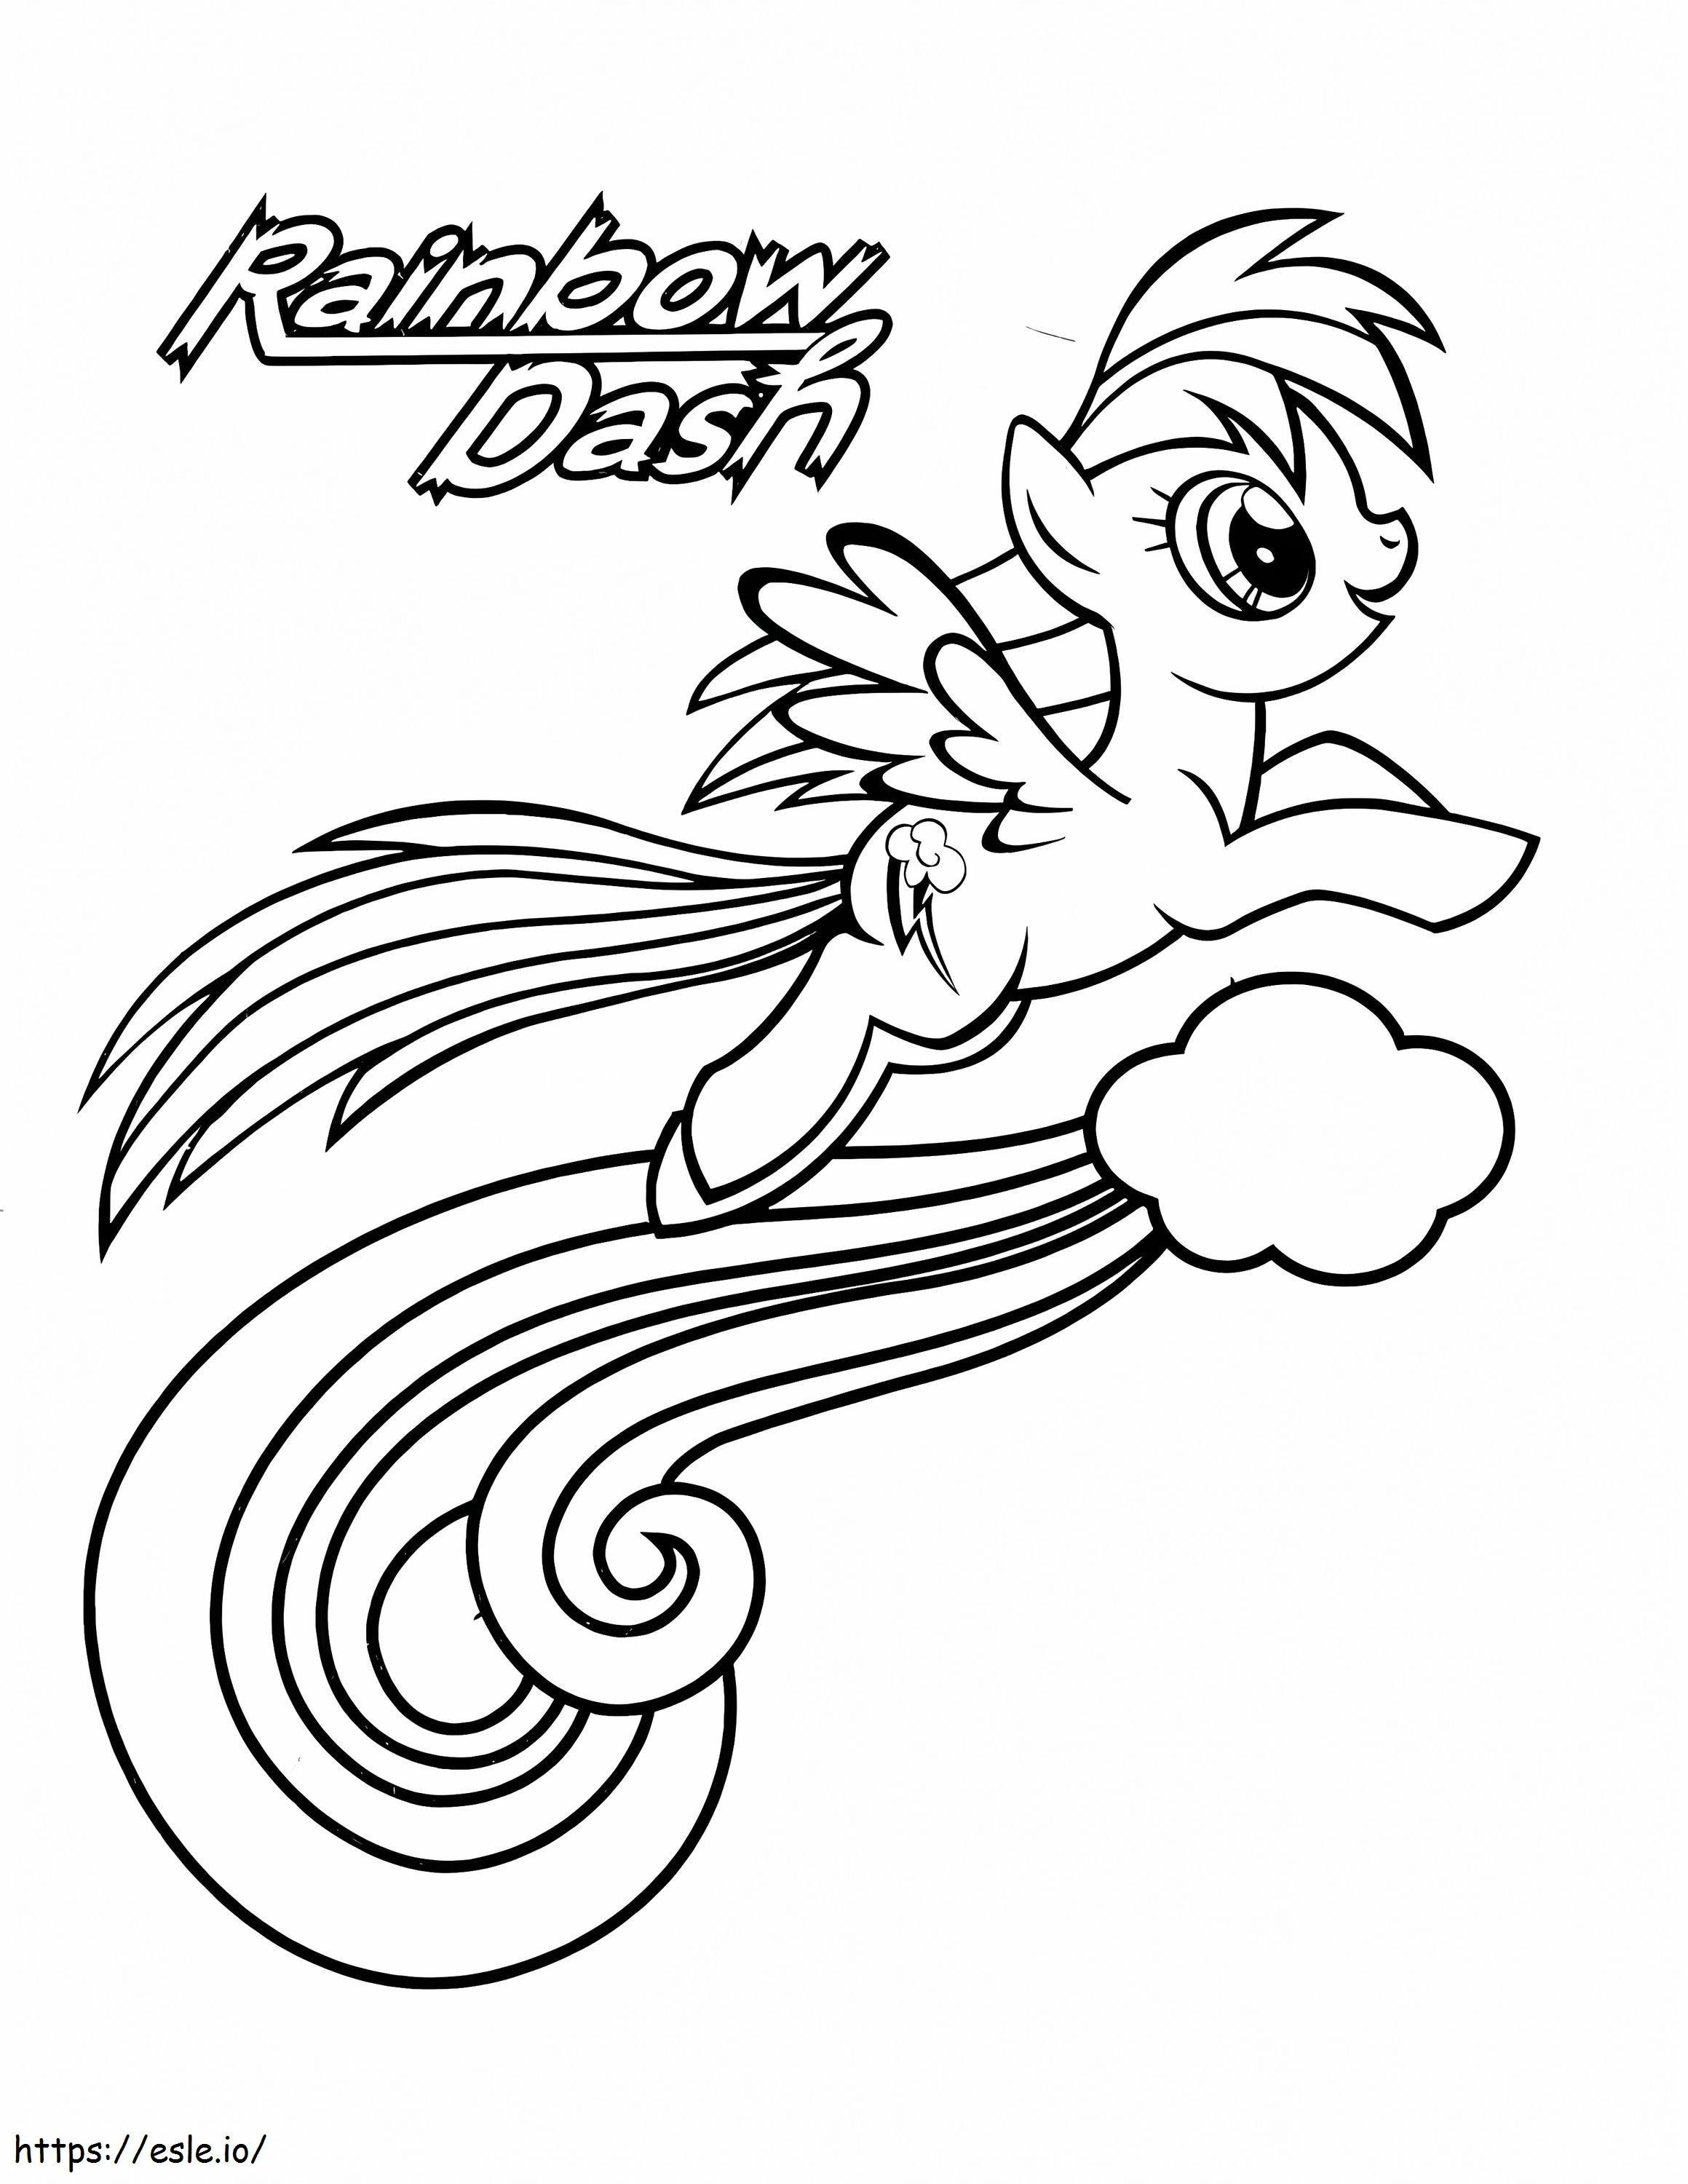 Rainbow Dash Flying Up coloring page